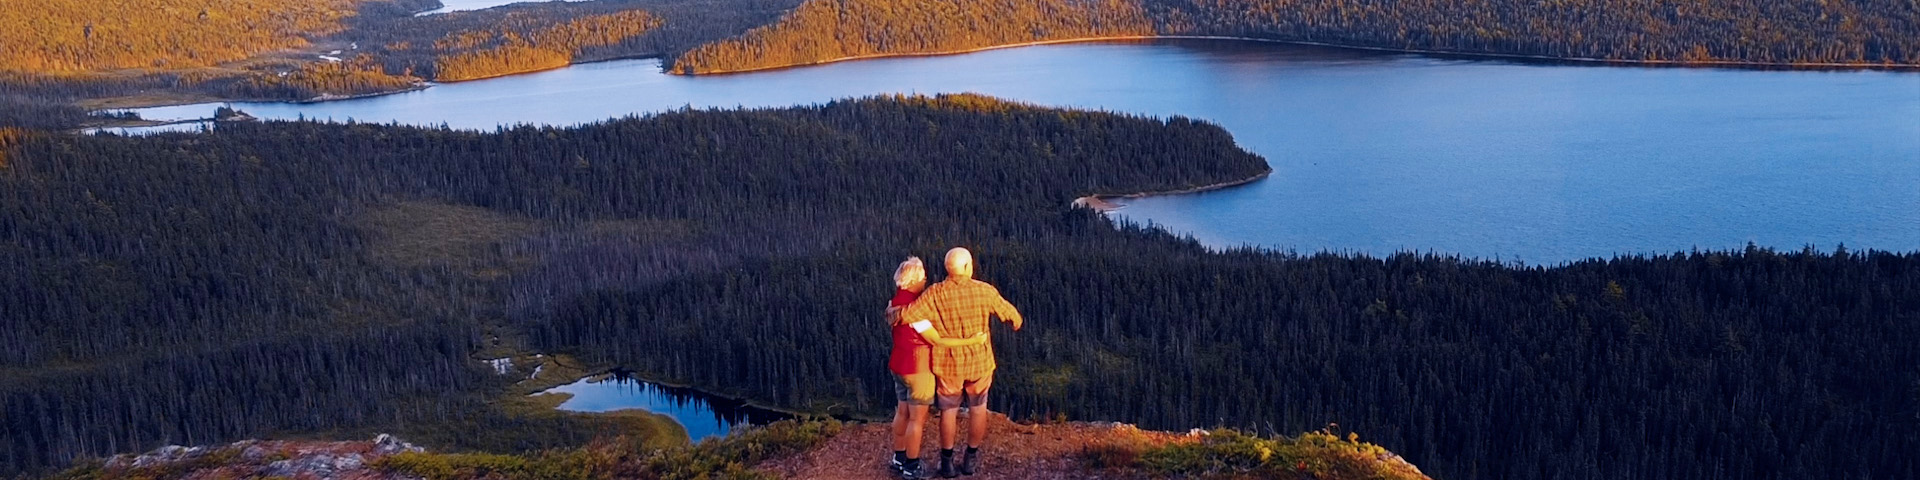 two people standing a cliff overlooking a pond surrounded by trees